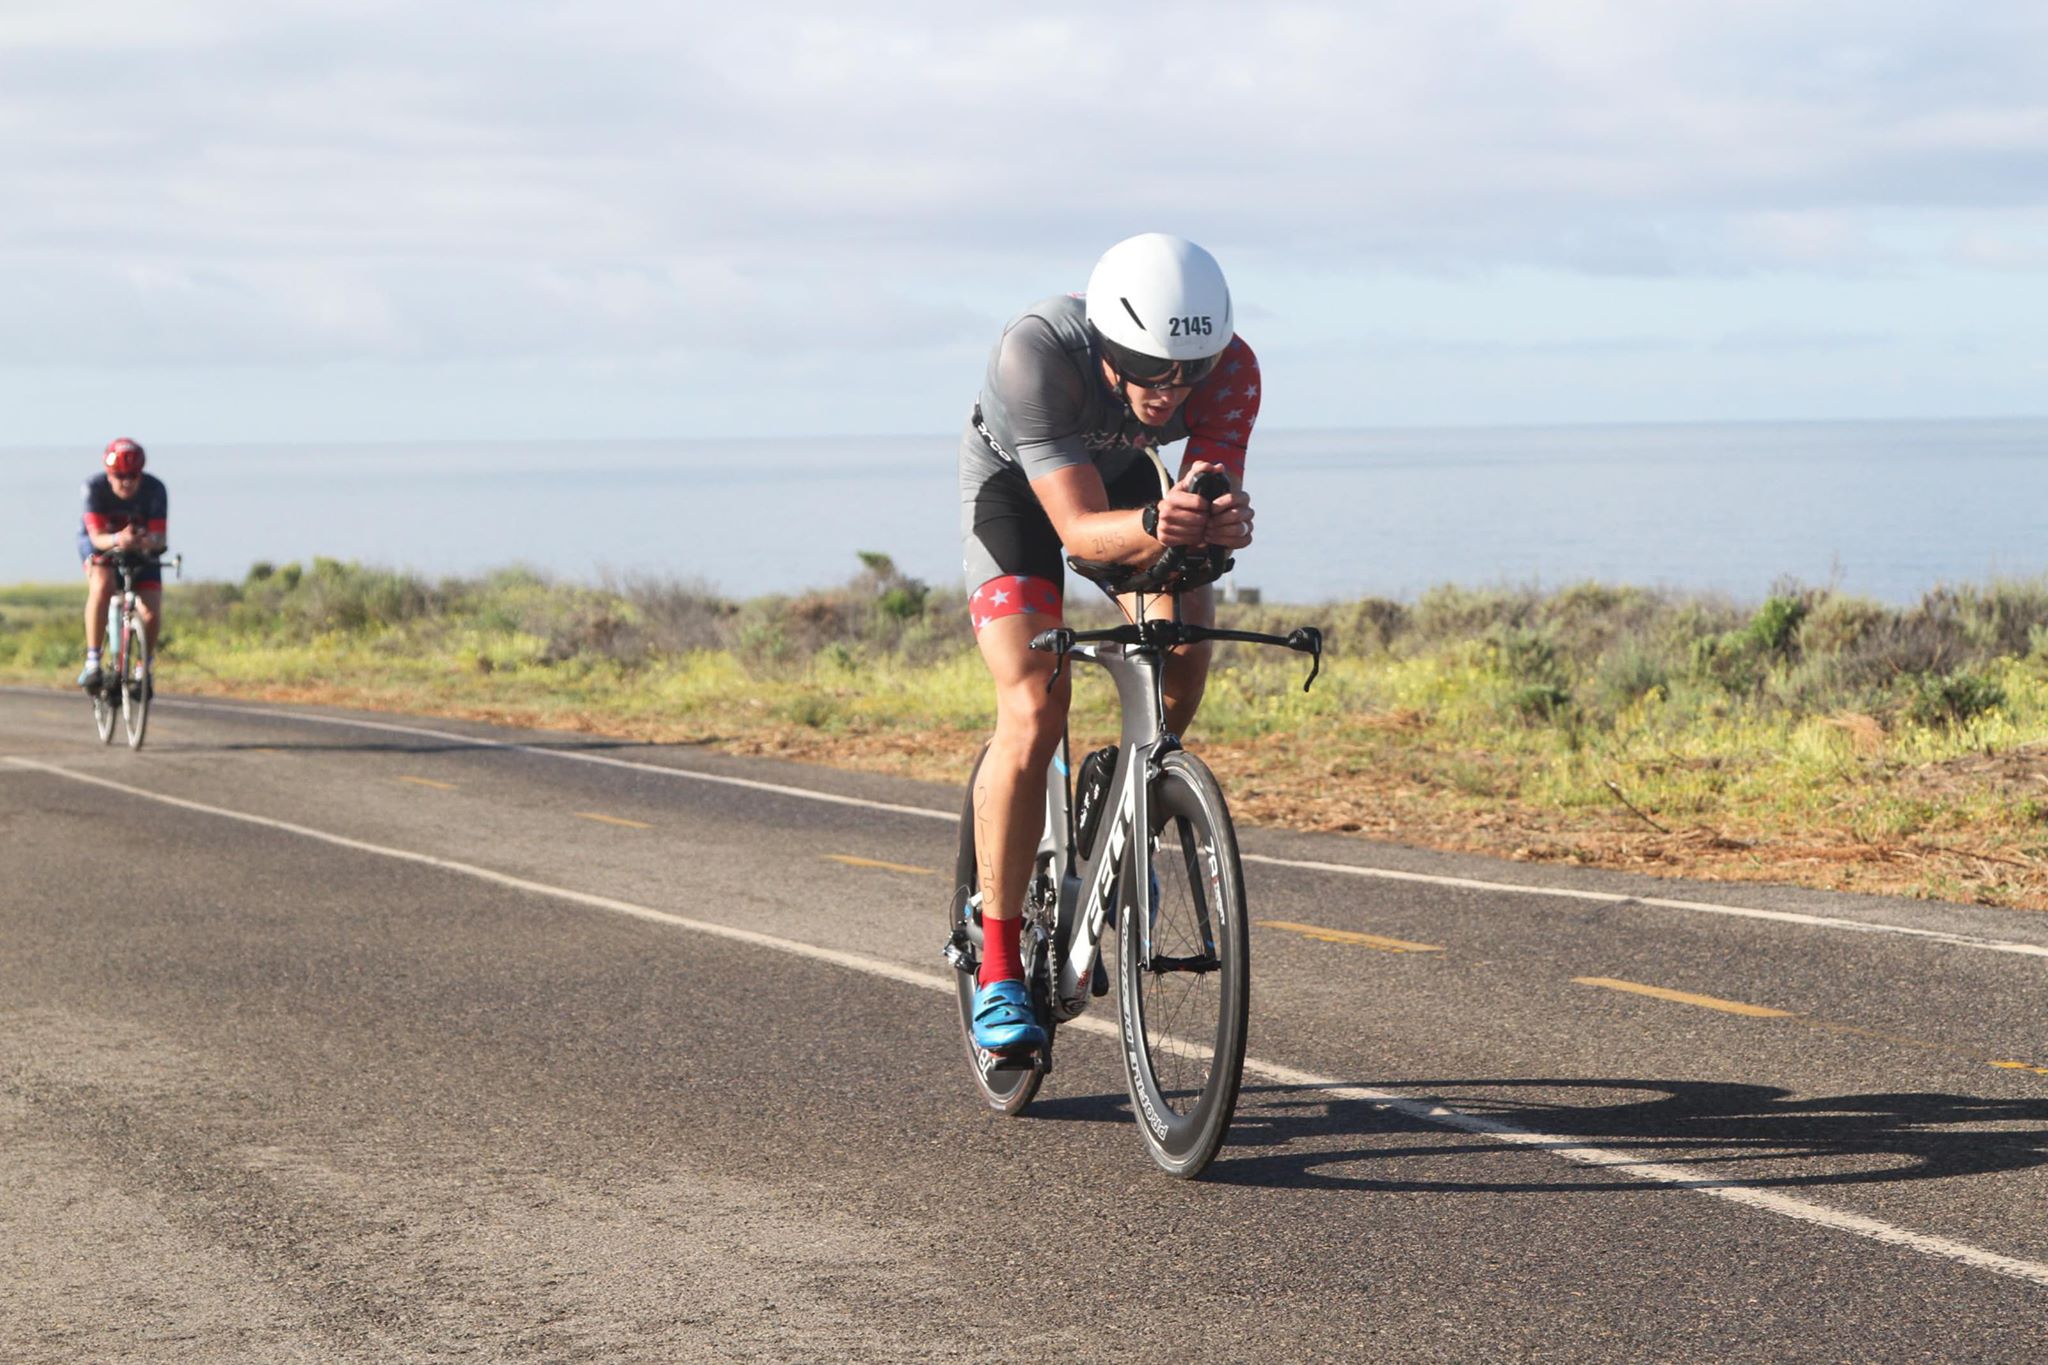 Coach_Terry_Wilson_Pursuit_of_The_Perfect_Race_IRONMAN_Oceanside_Seth_Smith_1.jpg